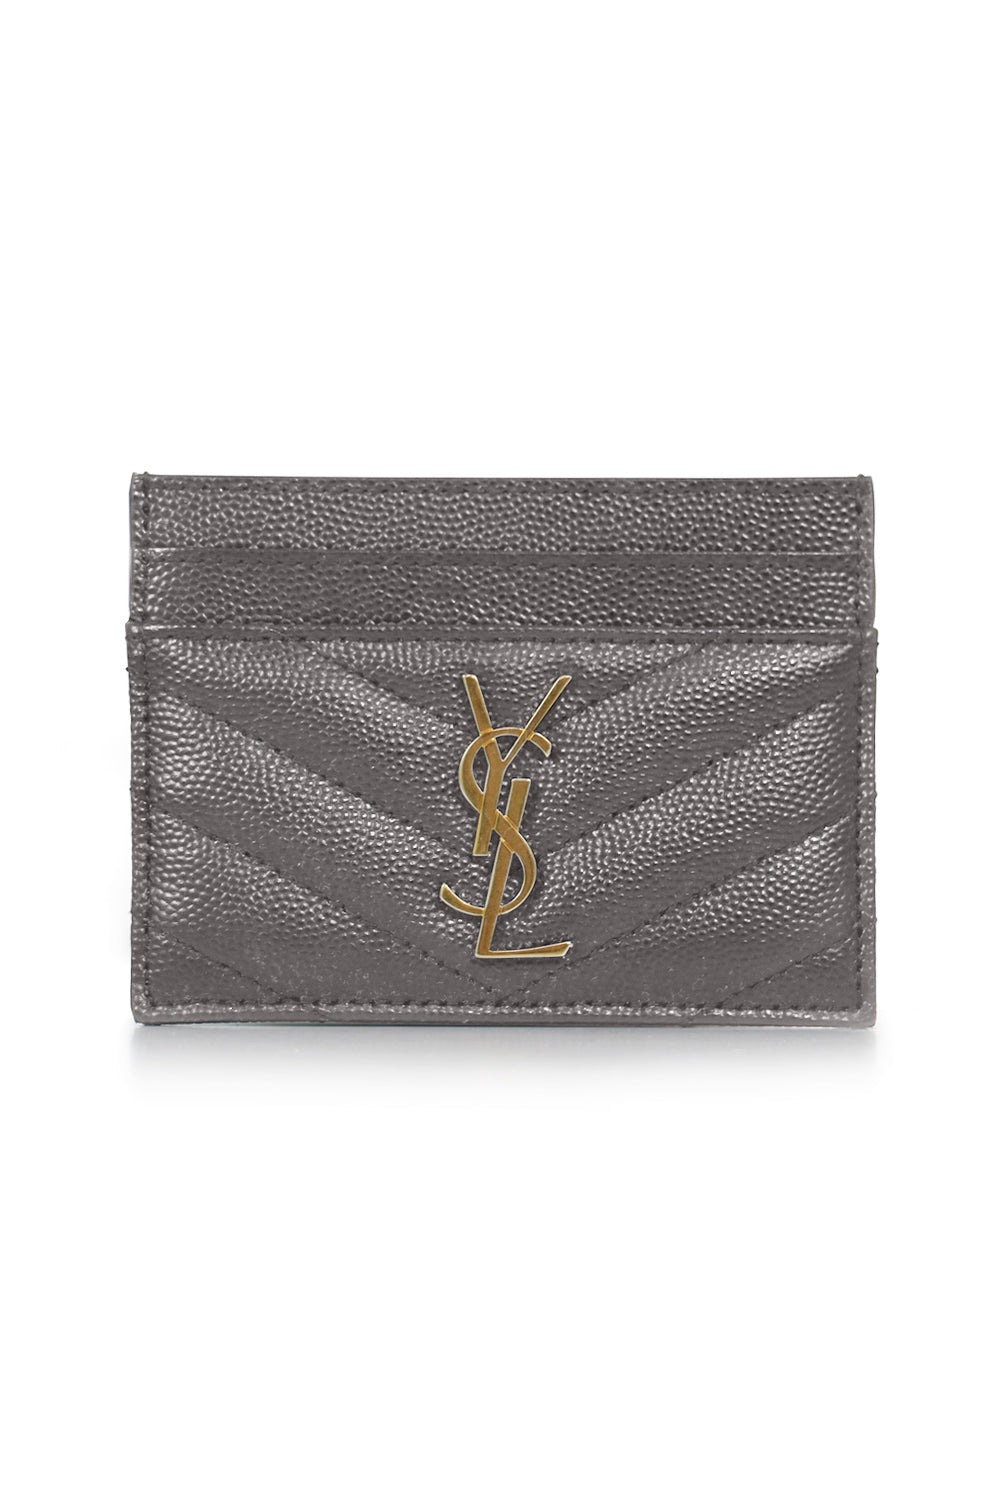 SAINT LAURENT SMALL LEATHER GOODS MULTI MONOGRAMME QUILTED CARDHOLDER | FOG/GOLD